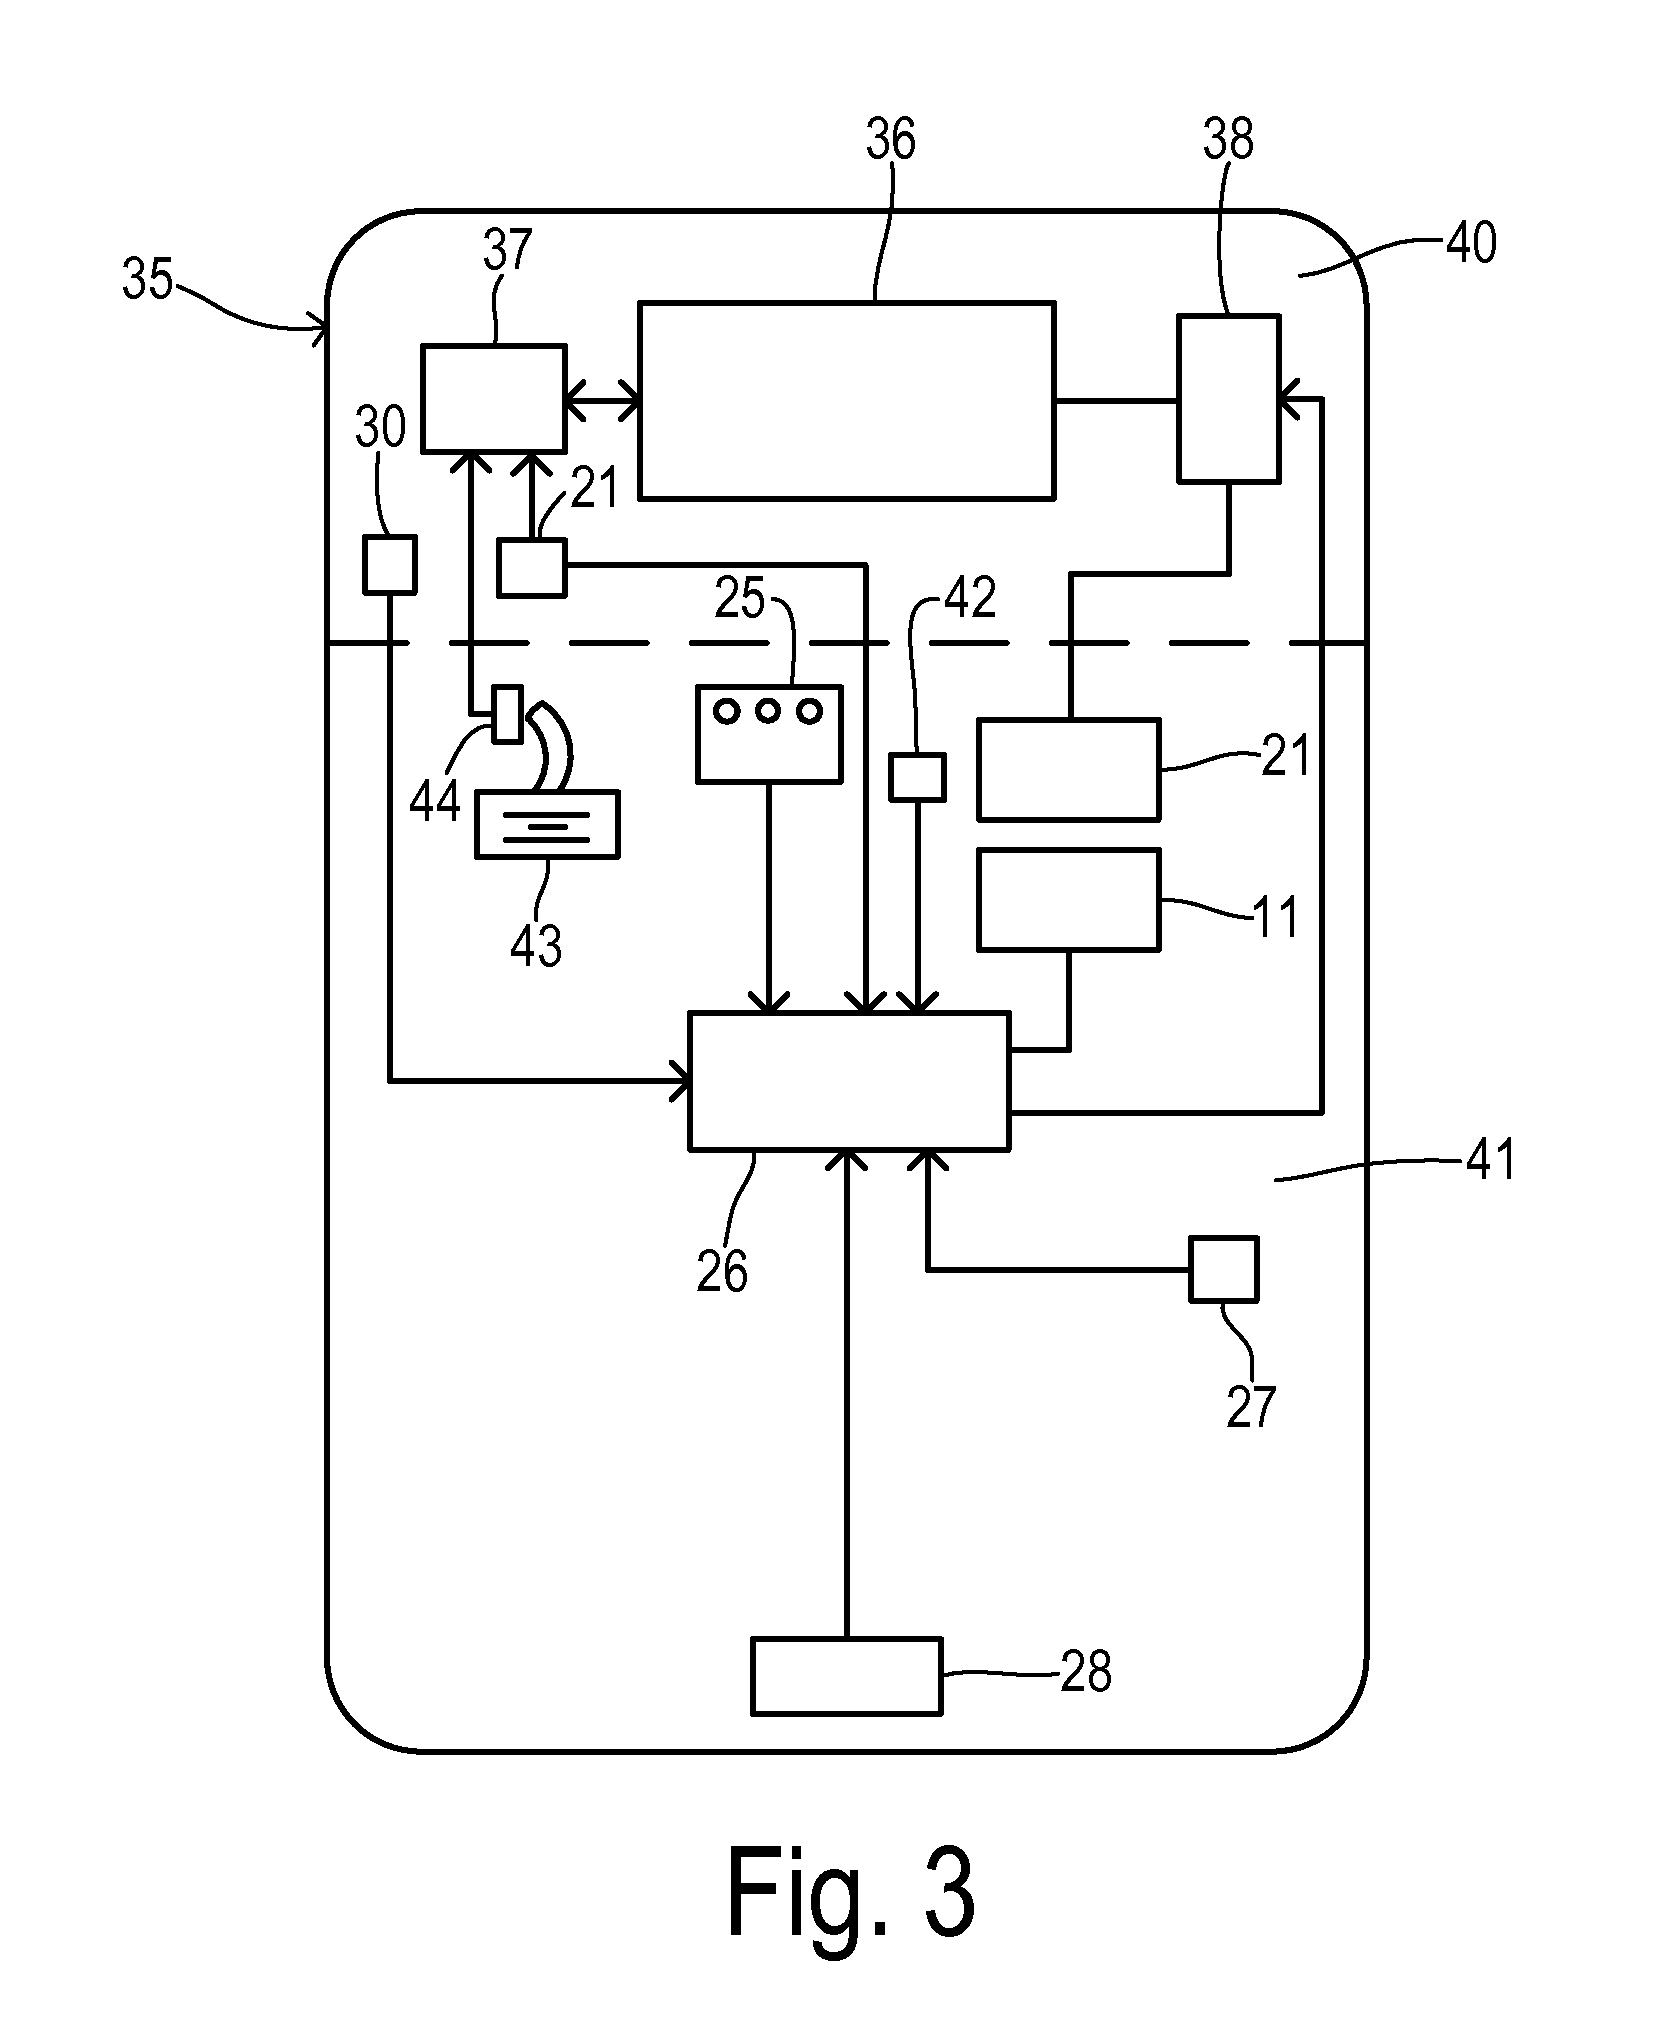 Vehicular HVAC system with modified air recirculation for start-stop engine